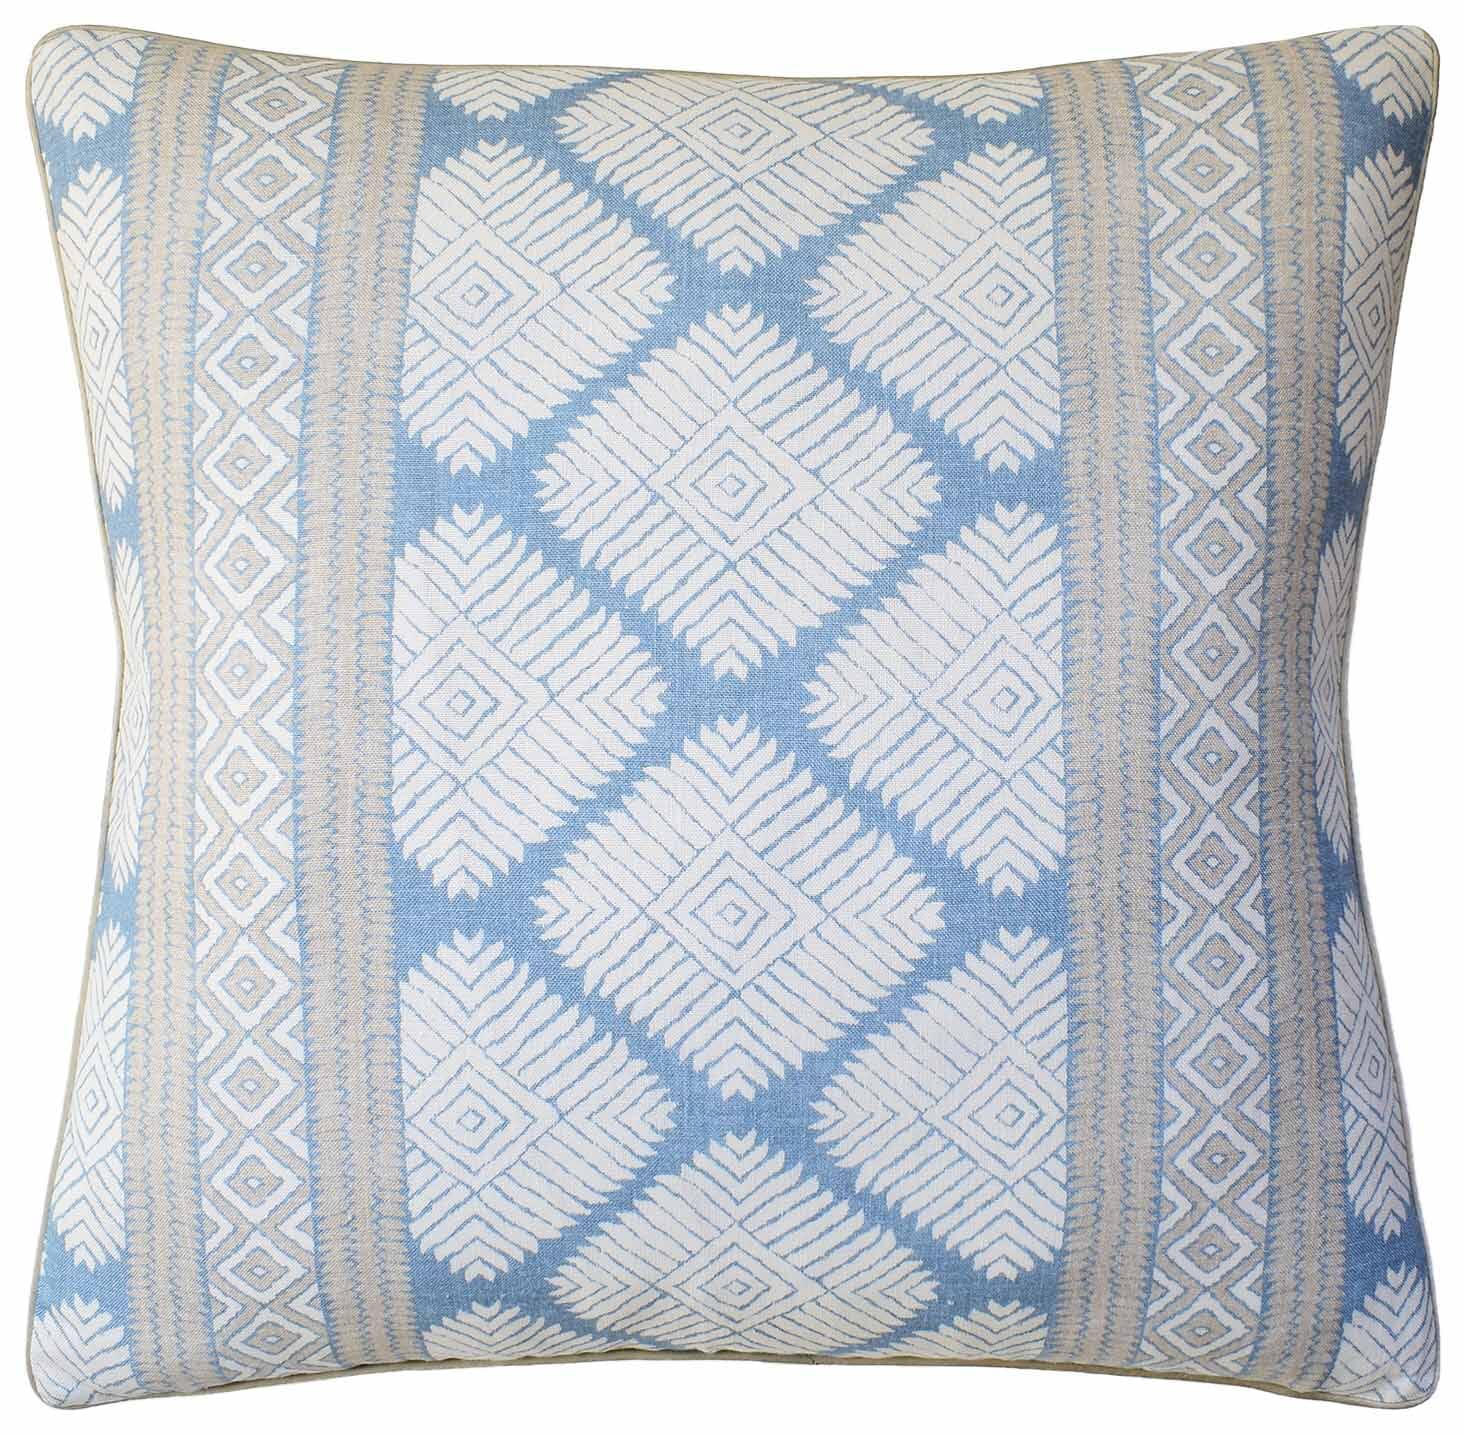 Austin Spa Blue Decorative Pillow Ryan Studio - Thibaut Fabric Throw Pillow at Fig Linens and Home